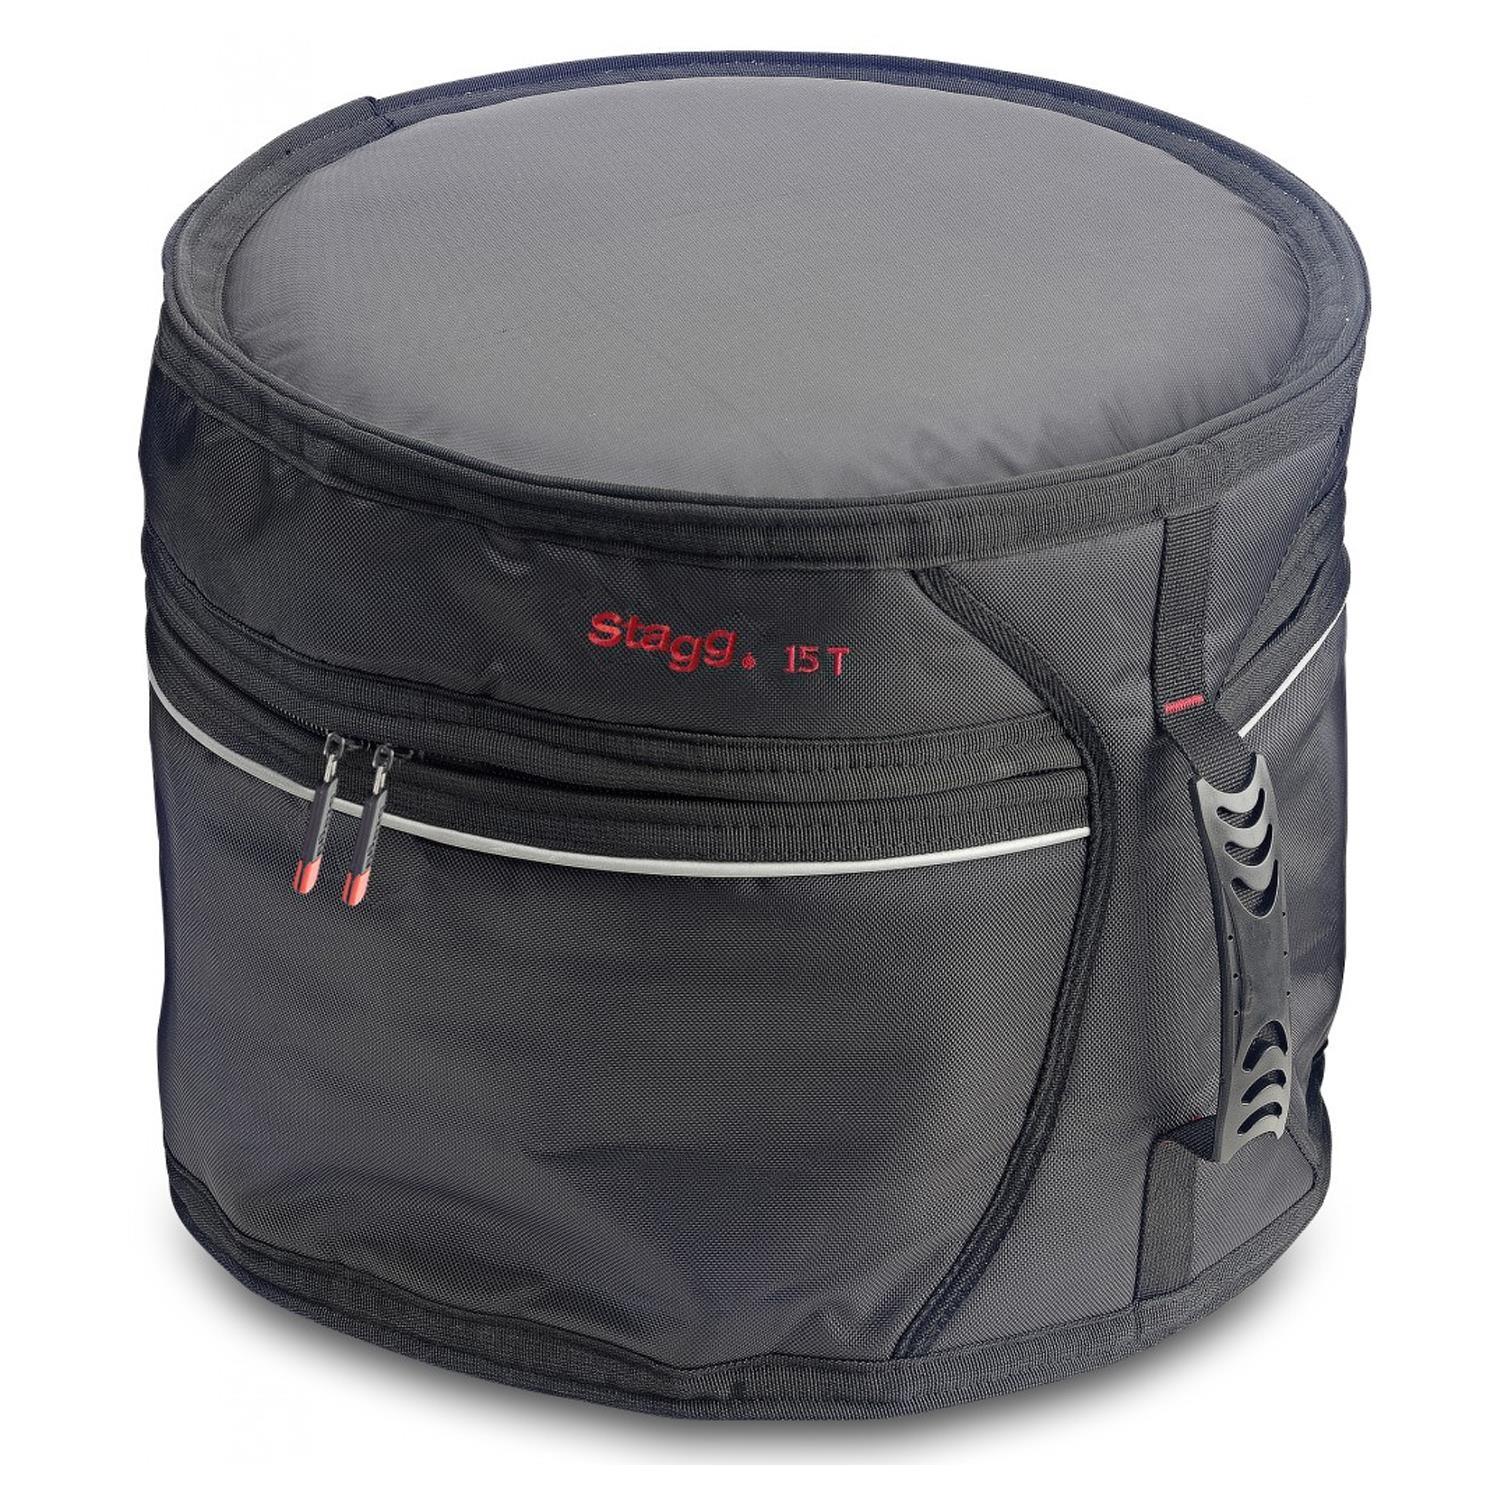 Stagg STTB-15 15" Professional Tom Bag - DY Pro Audio